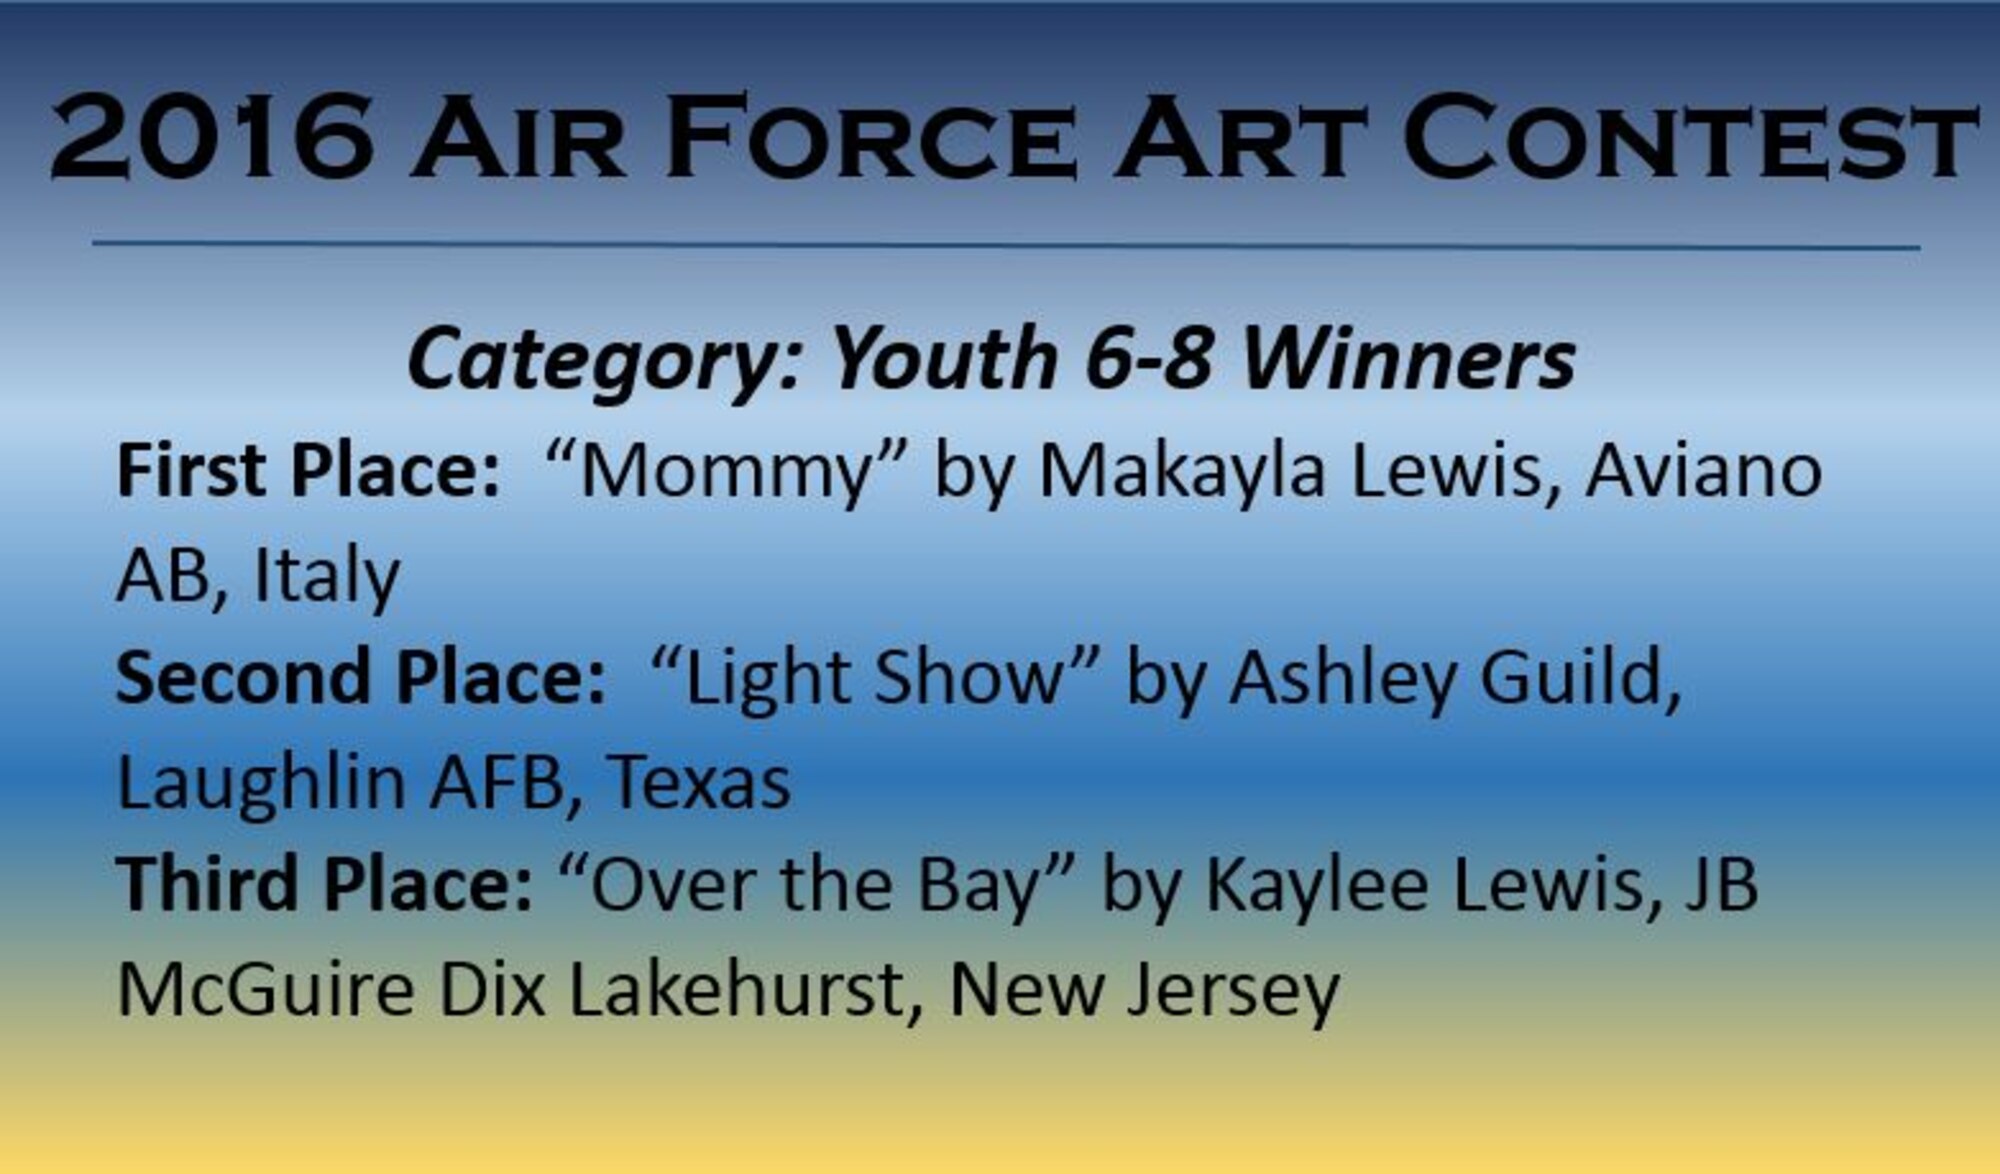 Congratulations to the 2016 Air Force Art Contest Youth 6-8 Winners.